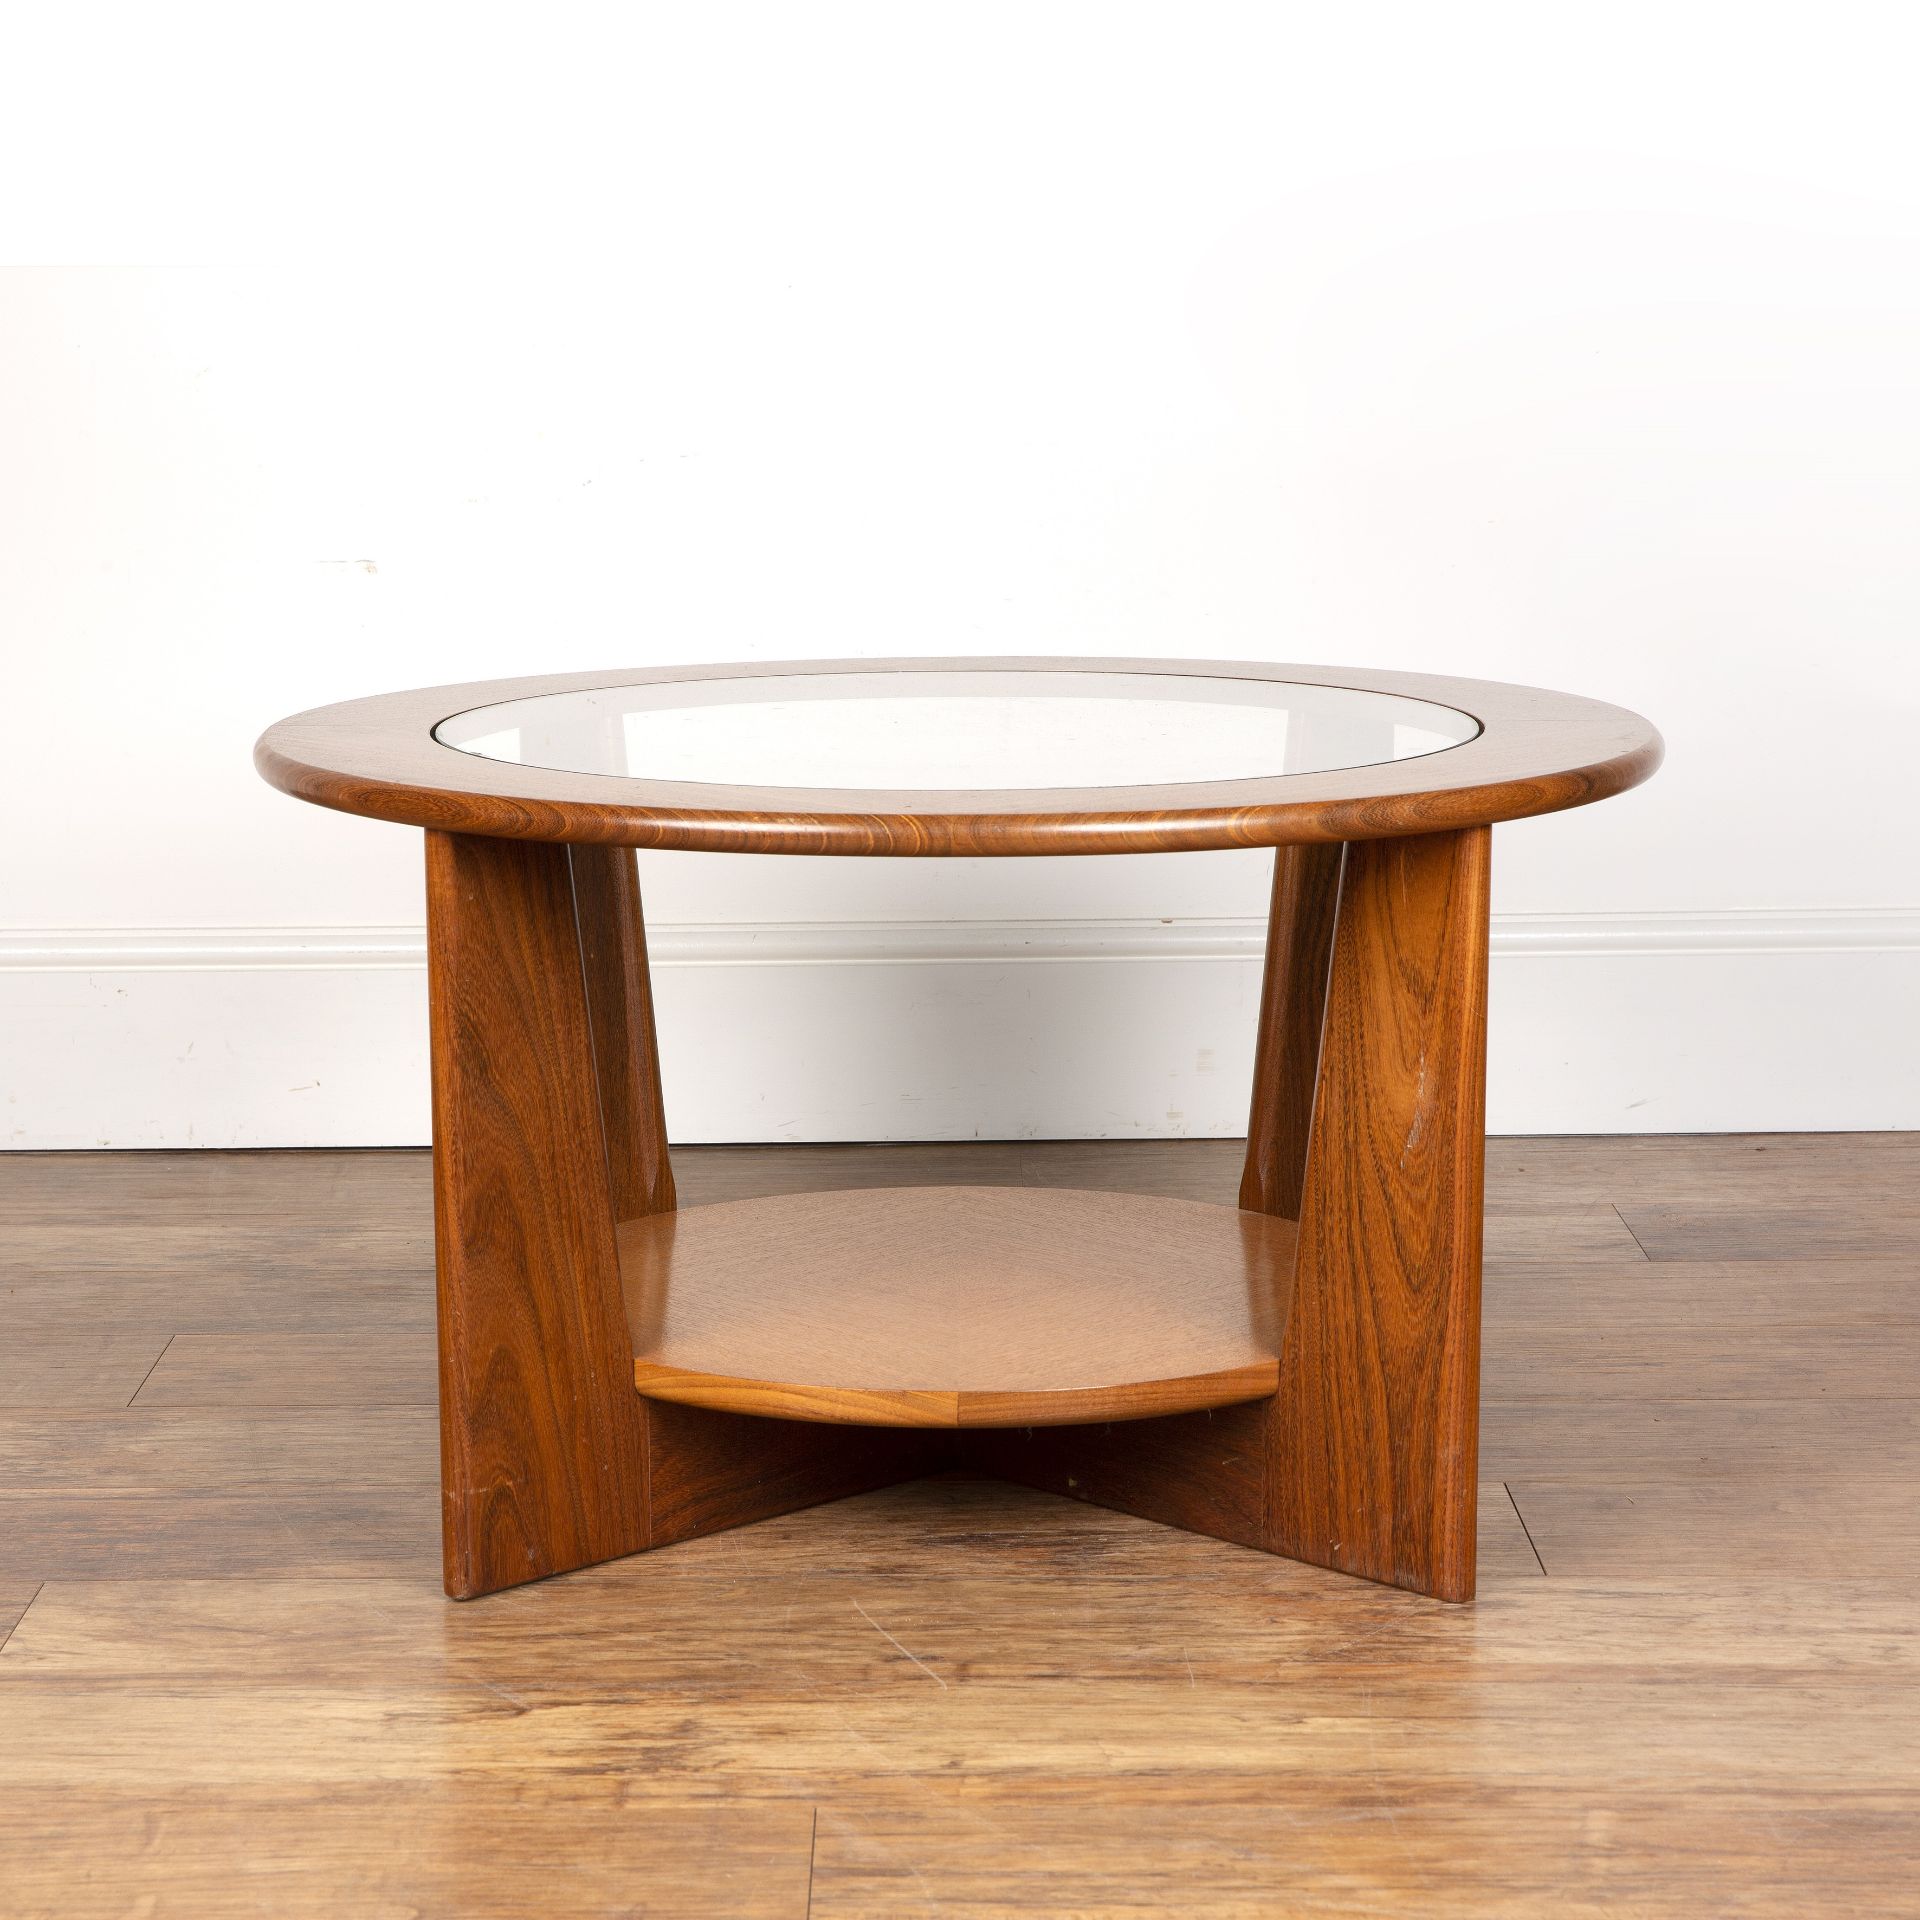 Attributed to G-plan teak, circular coffee table with glass inset top, unmarked, 77.5cm wide x - Bild 4 aus 5